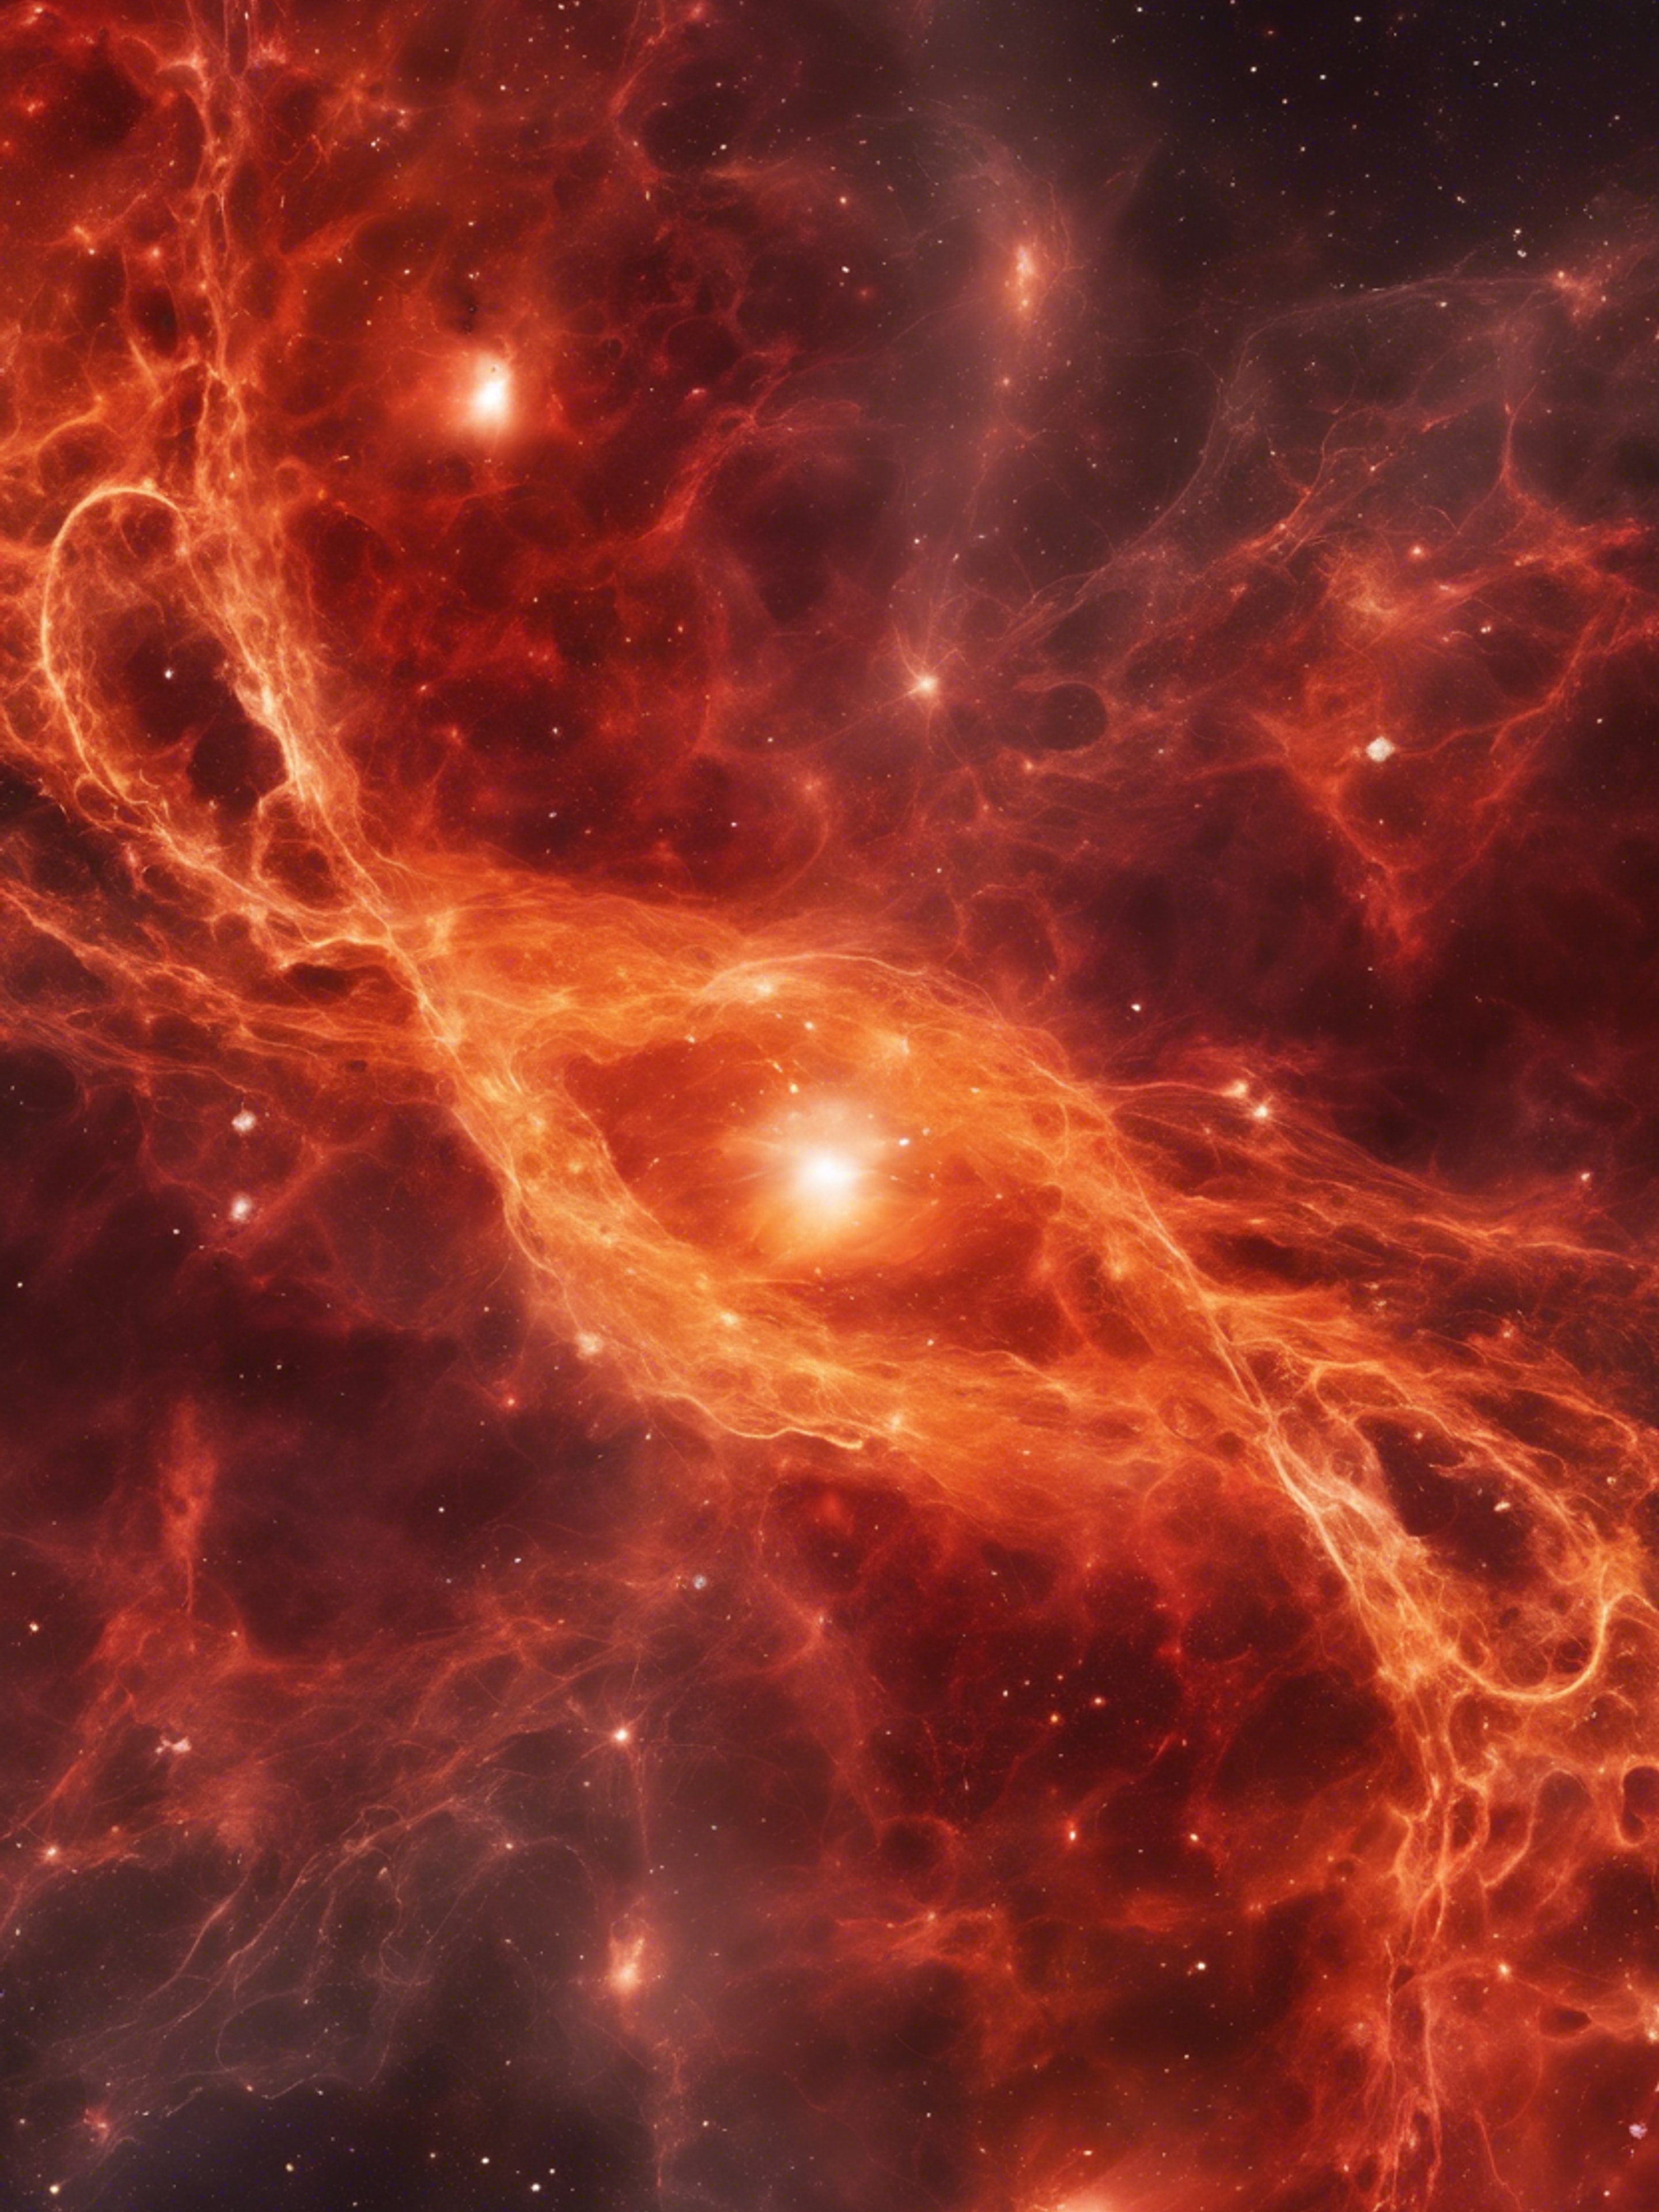 Red and orange nebula moving in chaos to form an alluring abstract pattern, lost in an endless loop. วอลล์เปเปอร์[8b81d5815a2d445c9bb4]